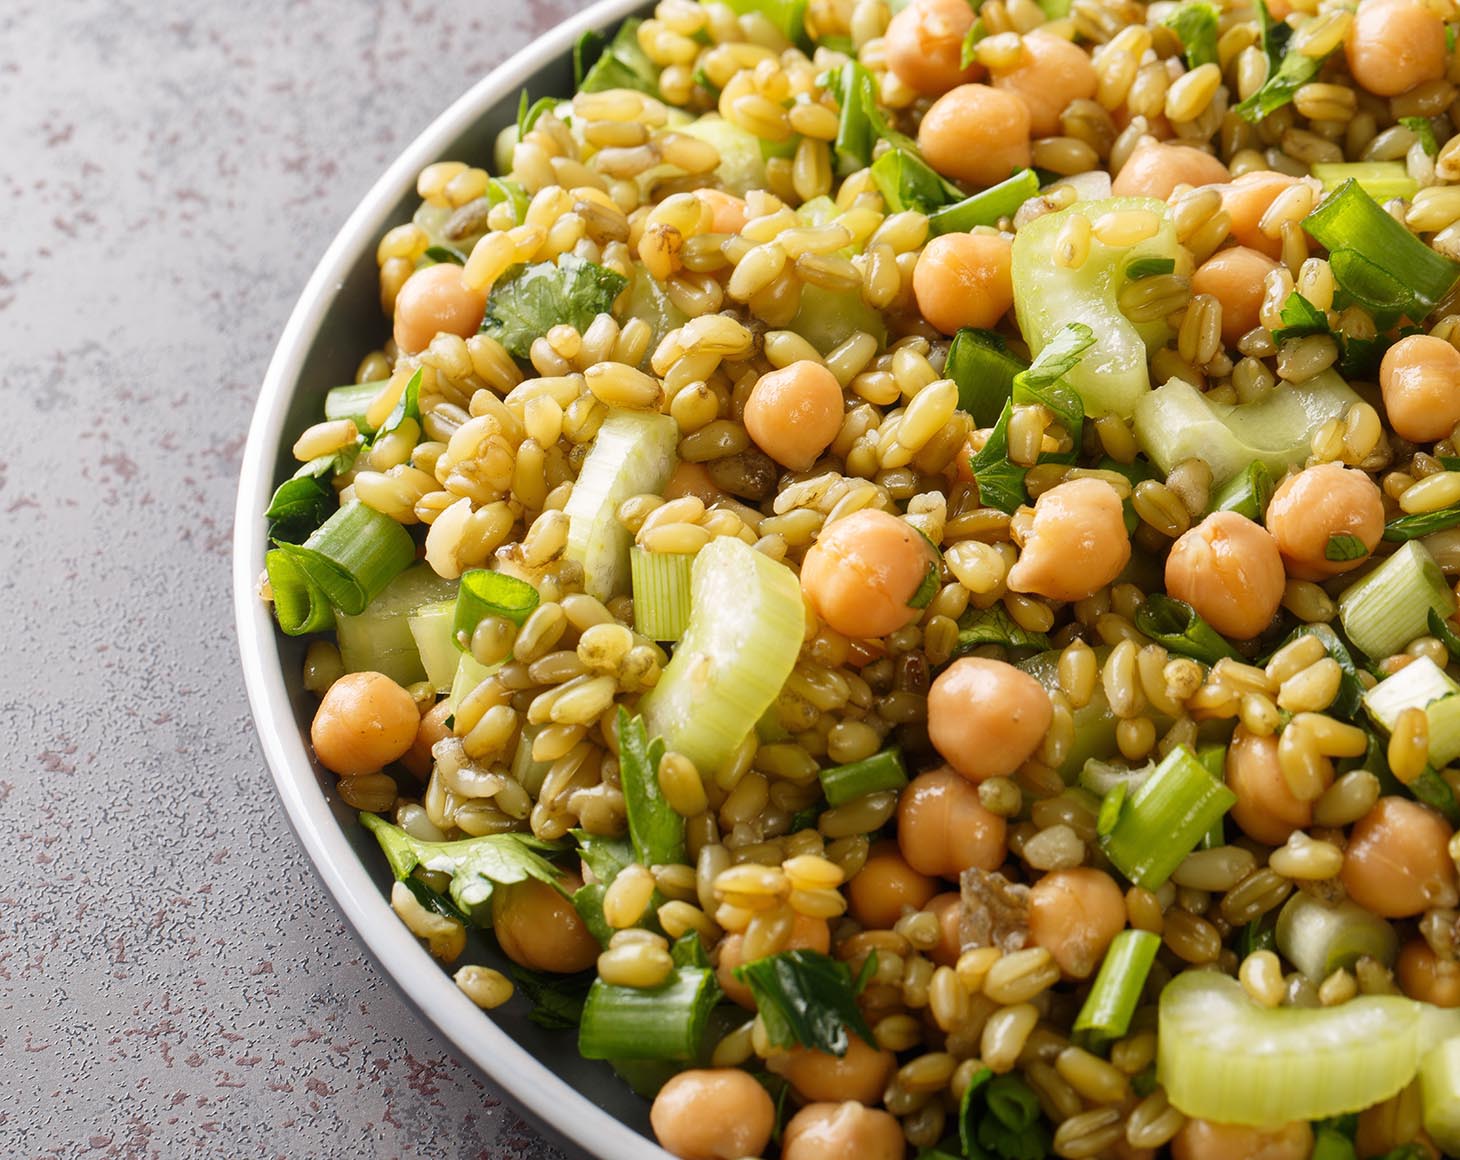 healthy-salad-made-with-organic-whole-freekeh-chickpeas-and-celery